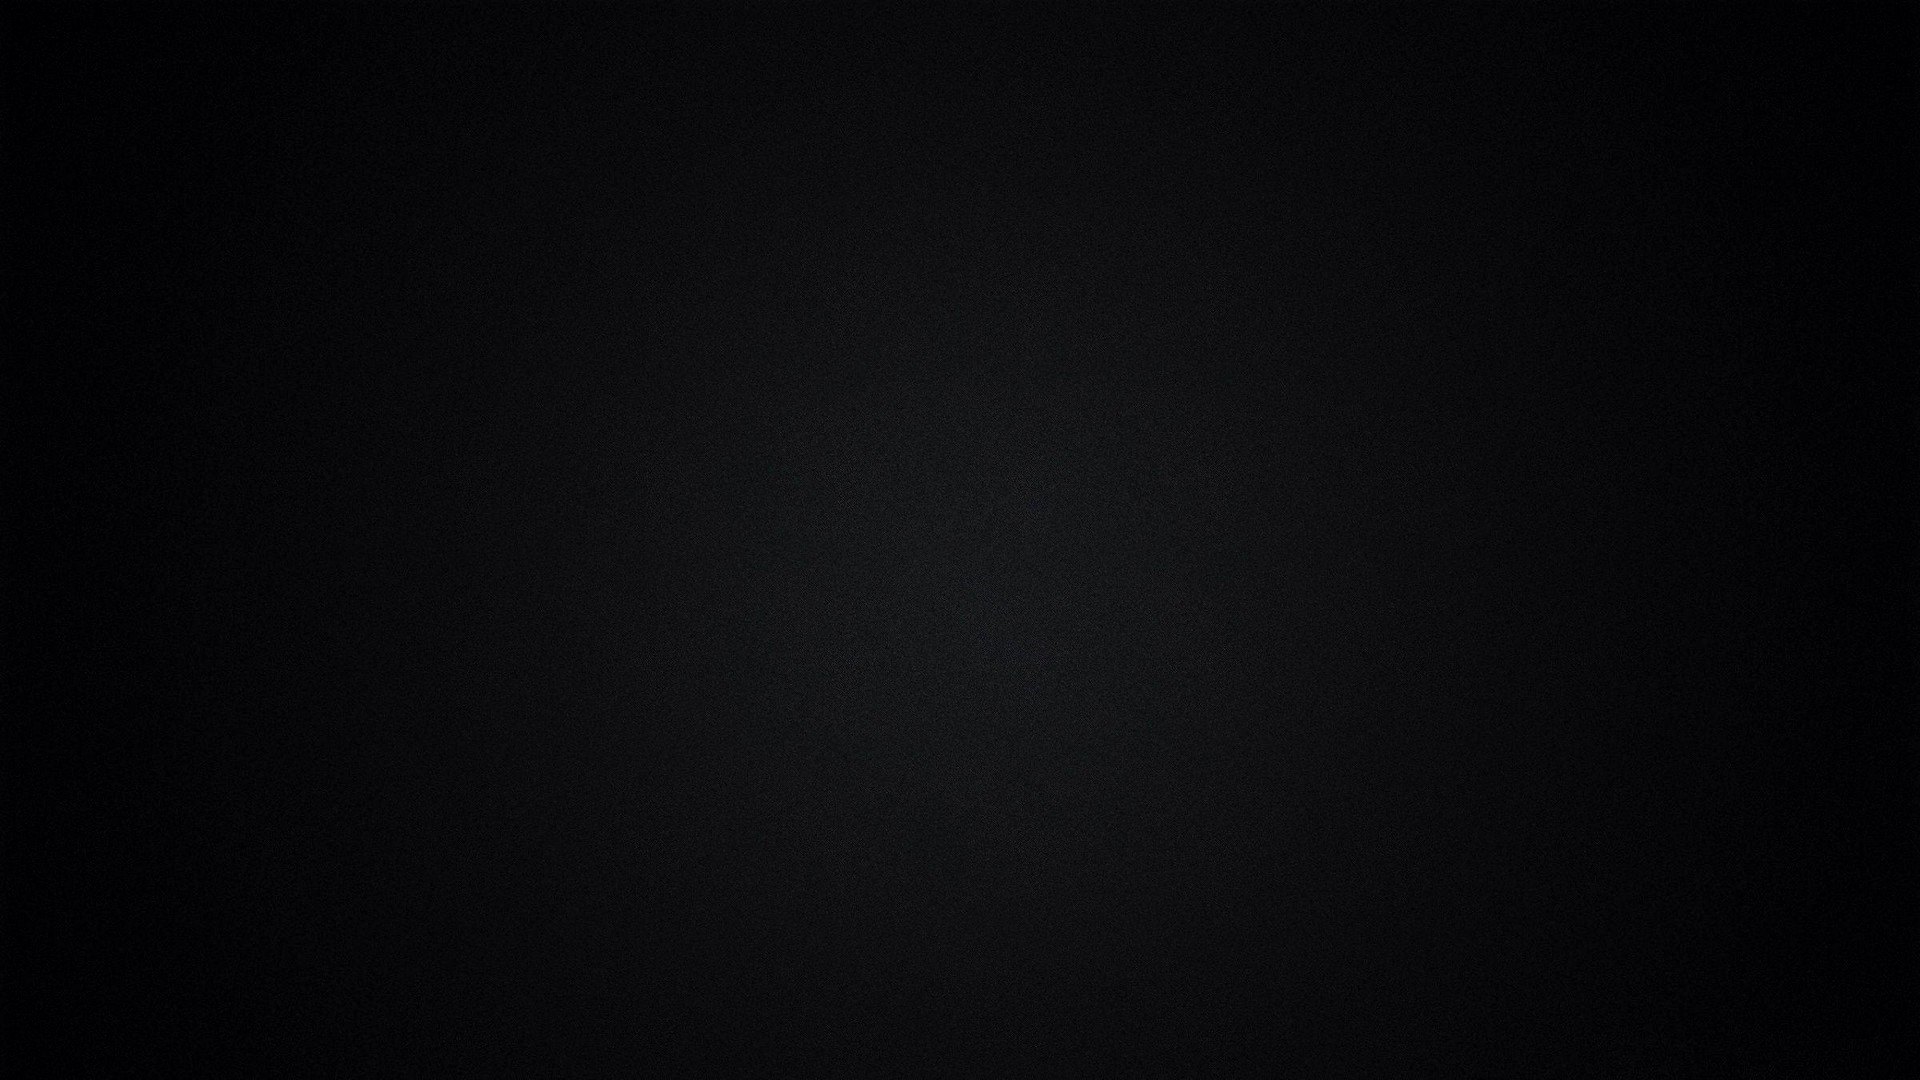 Black Mac Wallpaper With high-resolution 1920X1080 pixel. You can use and set as wallpaper for Notebook Screensavers, Mac Wallpapers, Mobile Home Screen, iPhone or Android Phones Lock Screen